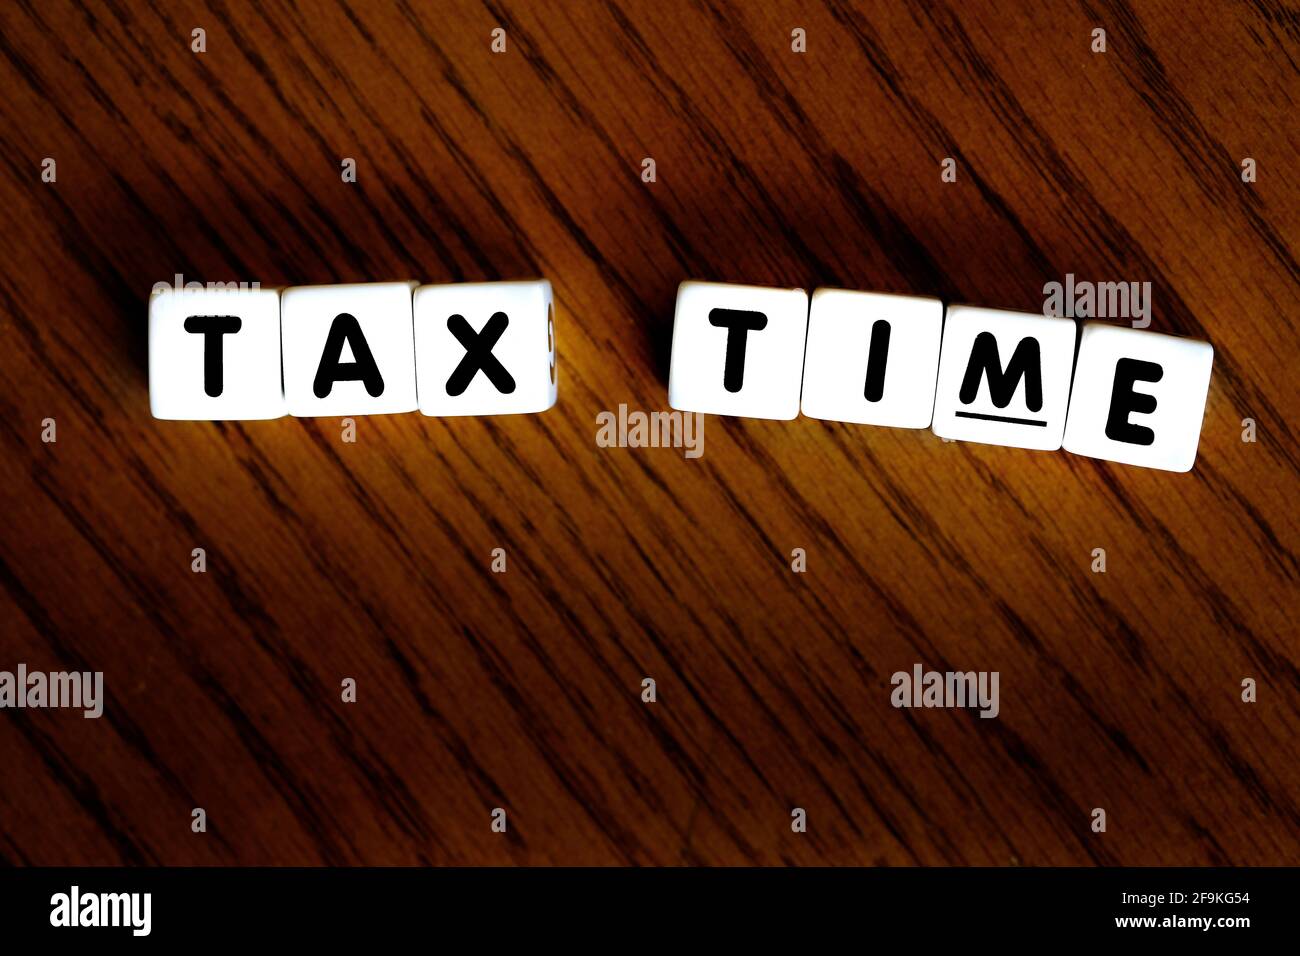 Tax time sign on wood dice block letters for IRS filings stressanti Foto Stock